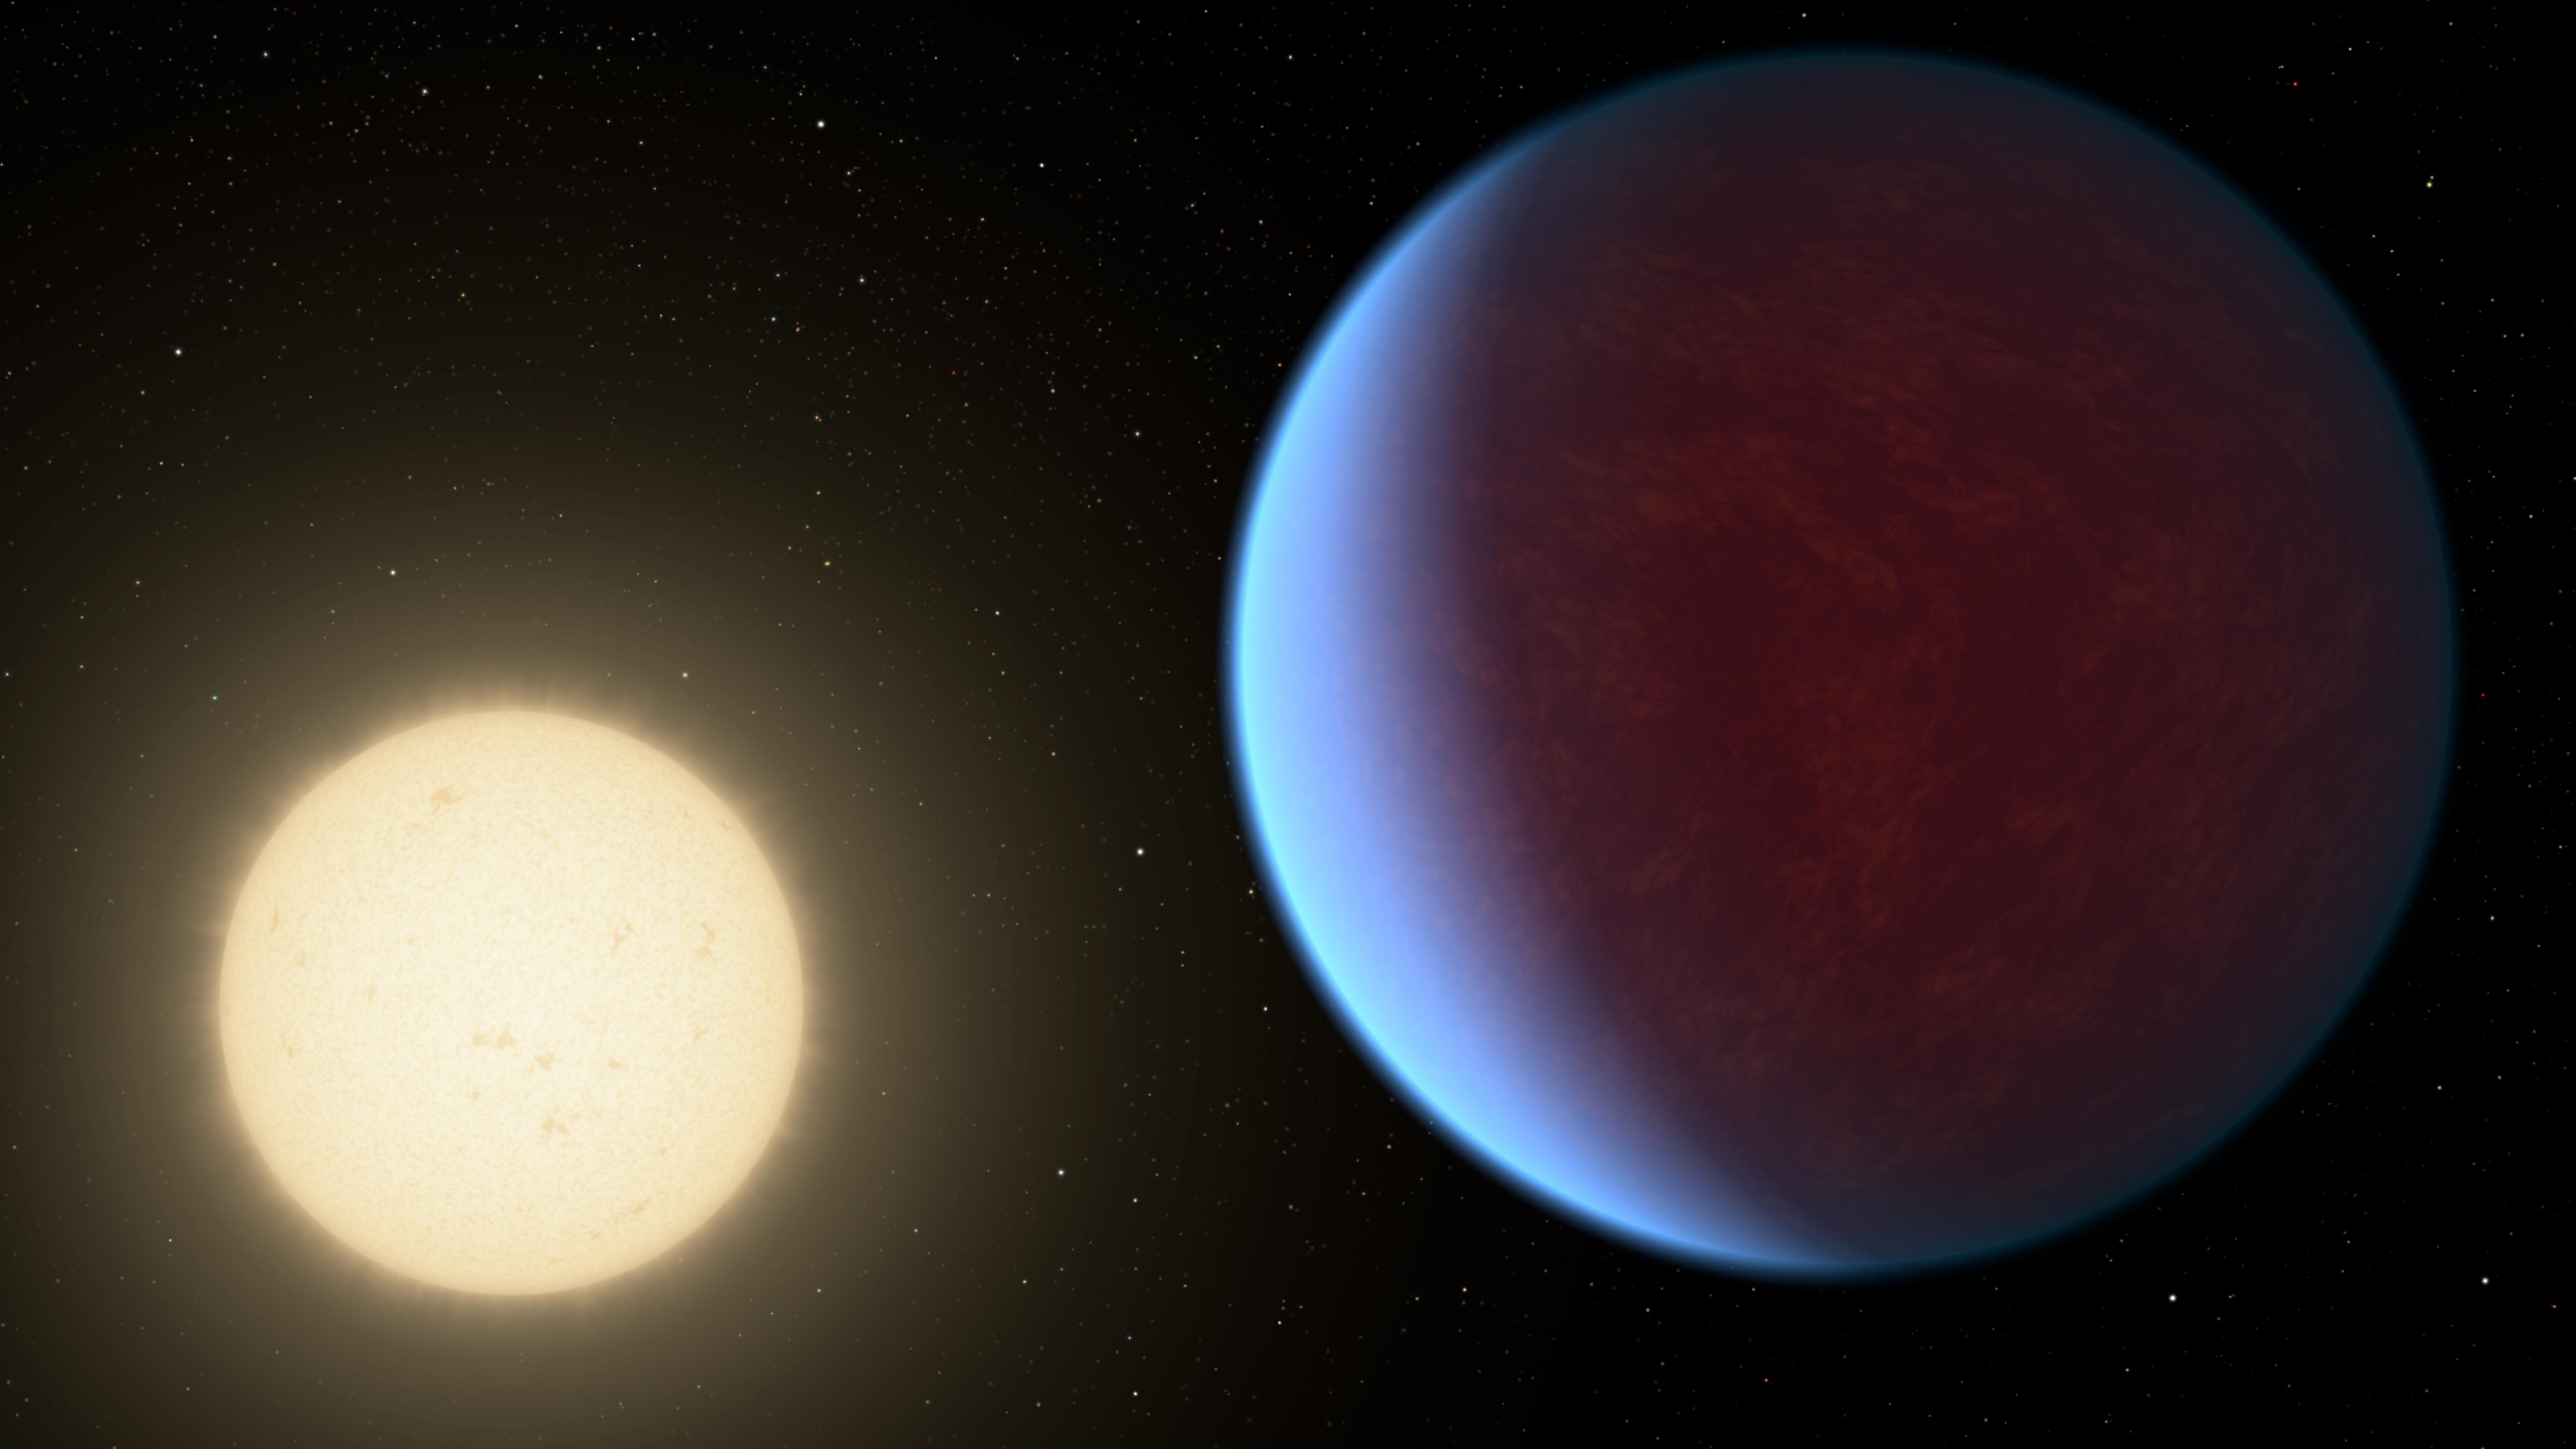 Rocky Planet Twice Earth’s Size Has a Thick Atmosphere, Scientists Say